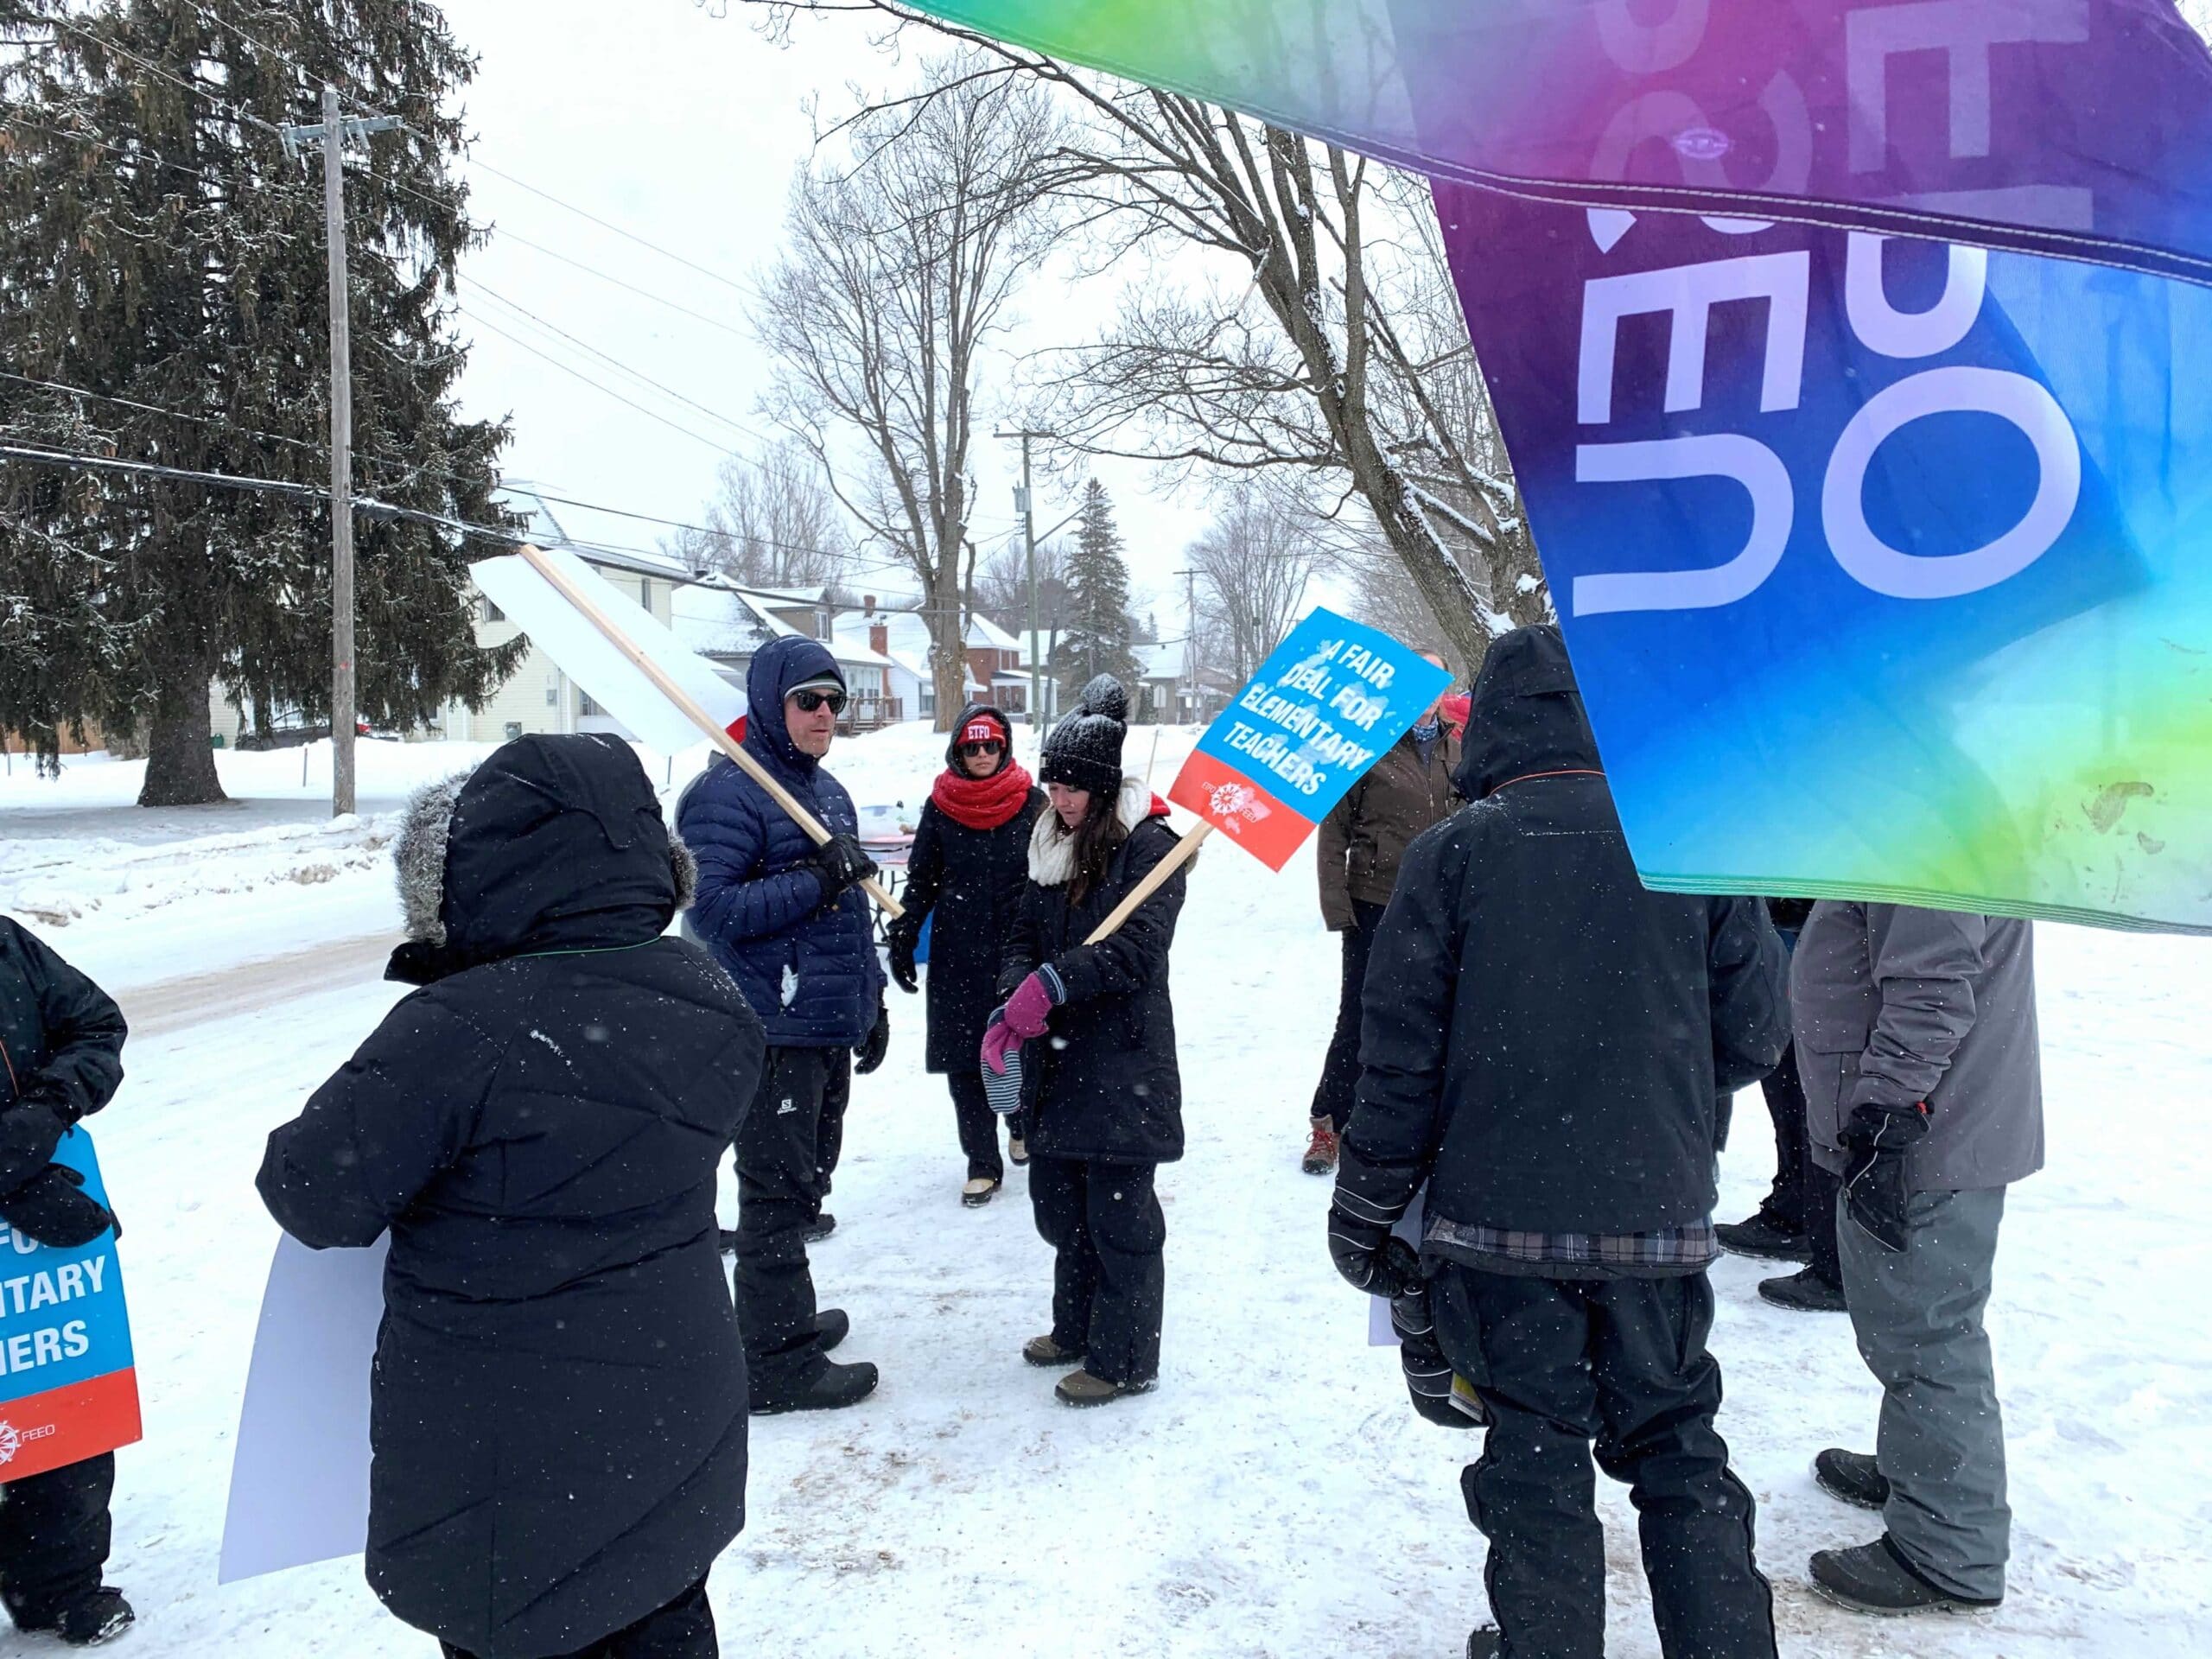 OPSEU members standing outside of school to protest